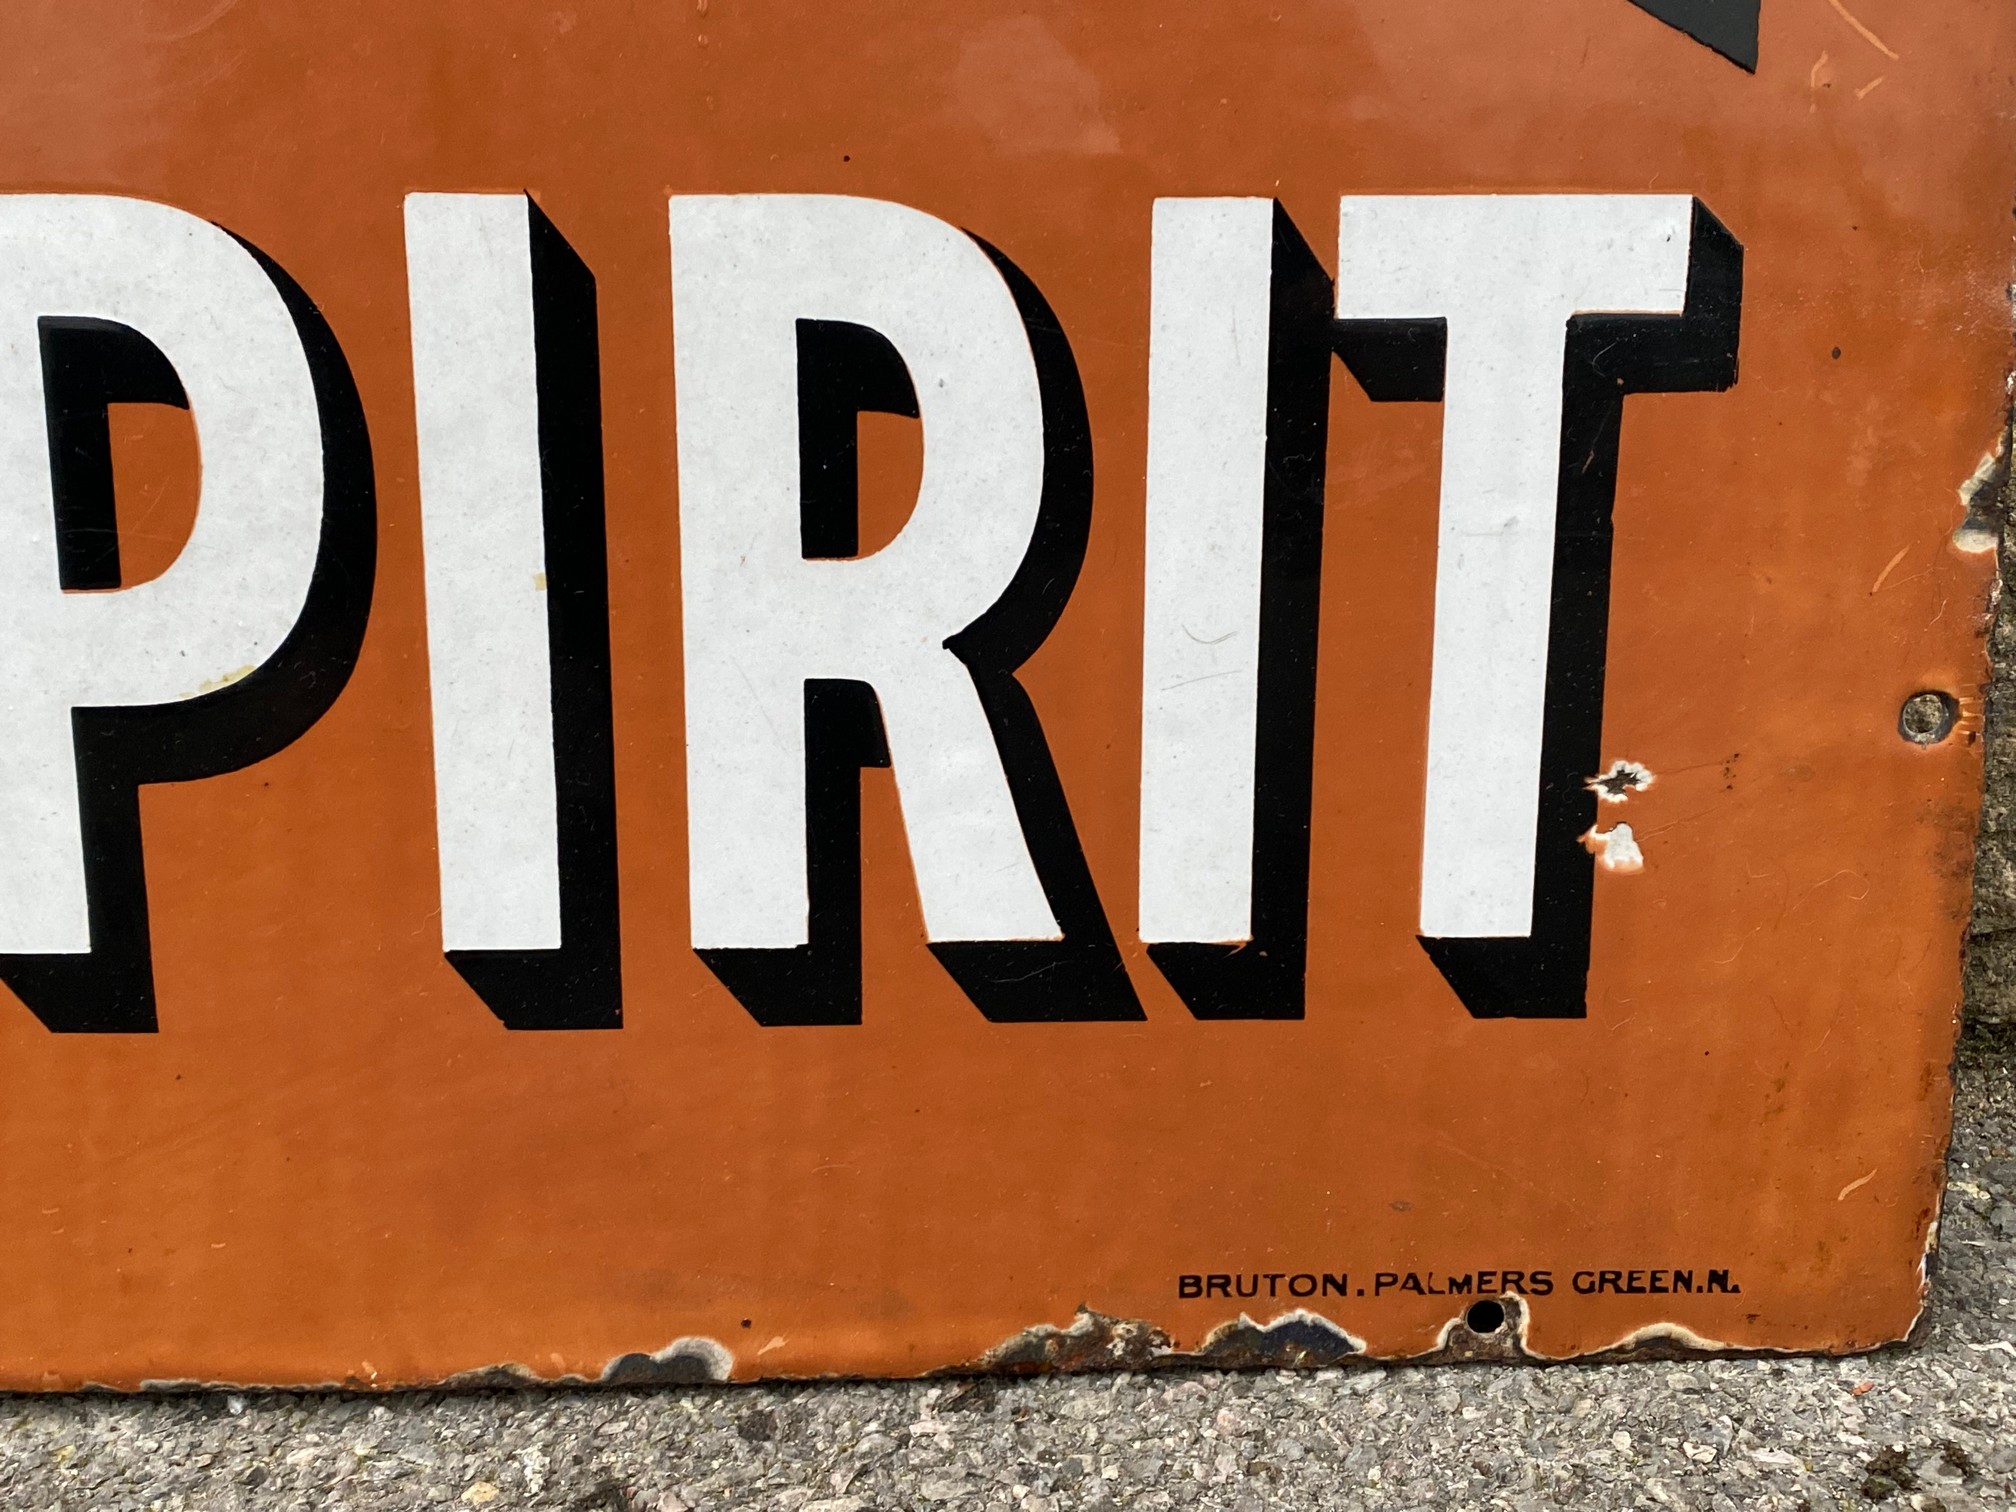 A Combine Motor Spirit rectangular enamel sign by Bruton of Palmers Green, in good condition, 36 x - Image 3 of 5